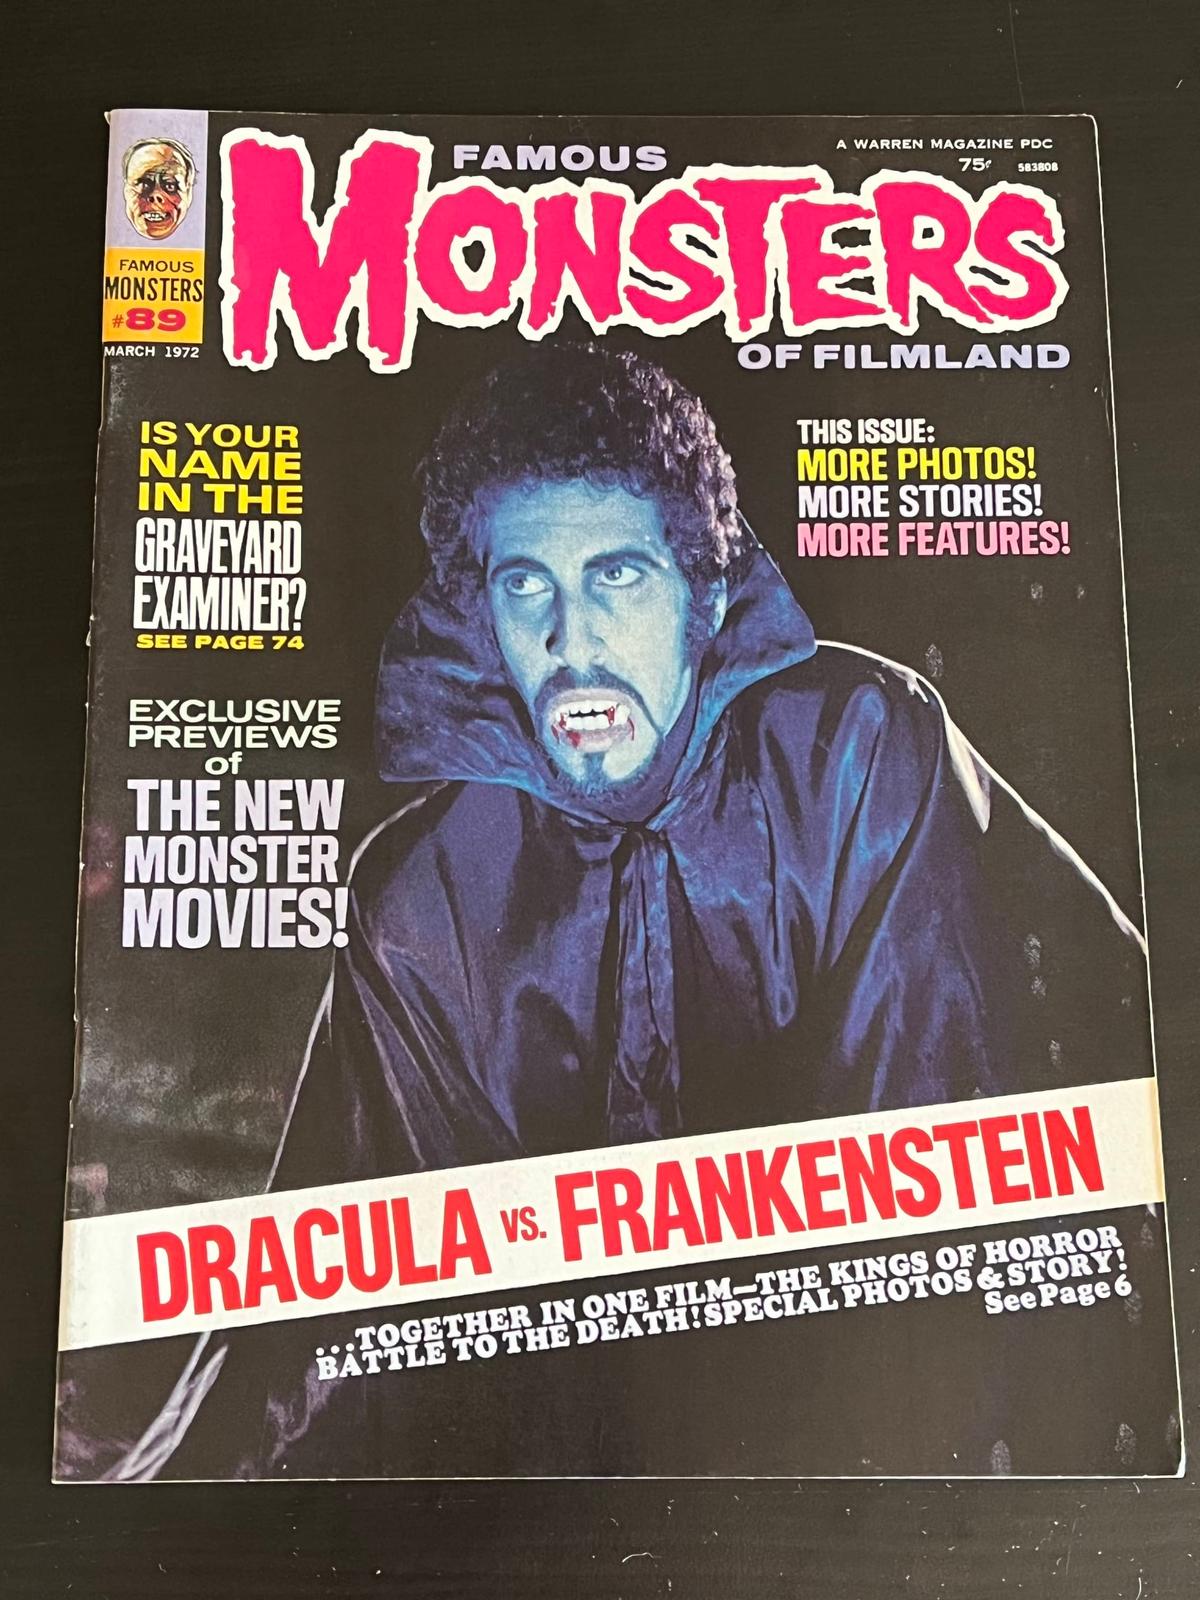 Famous Monsters #89/1972 Obscure Issue! Dracula vs. Frankenstein Cover!